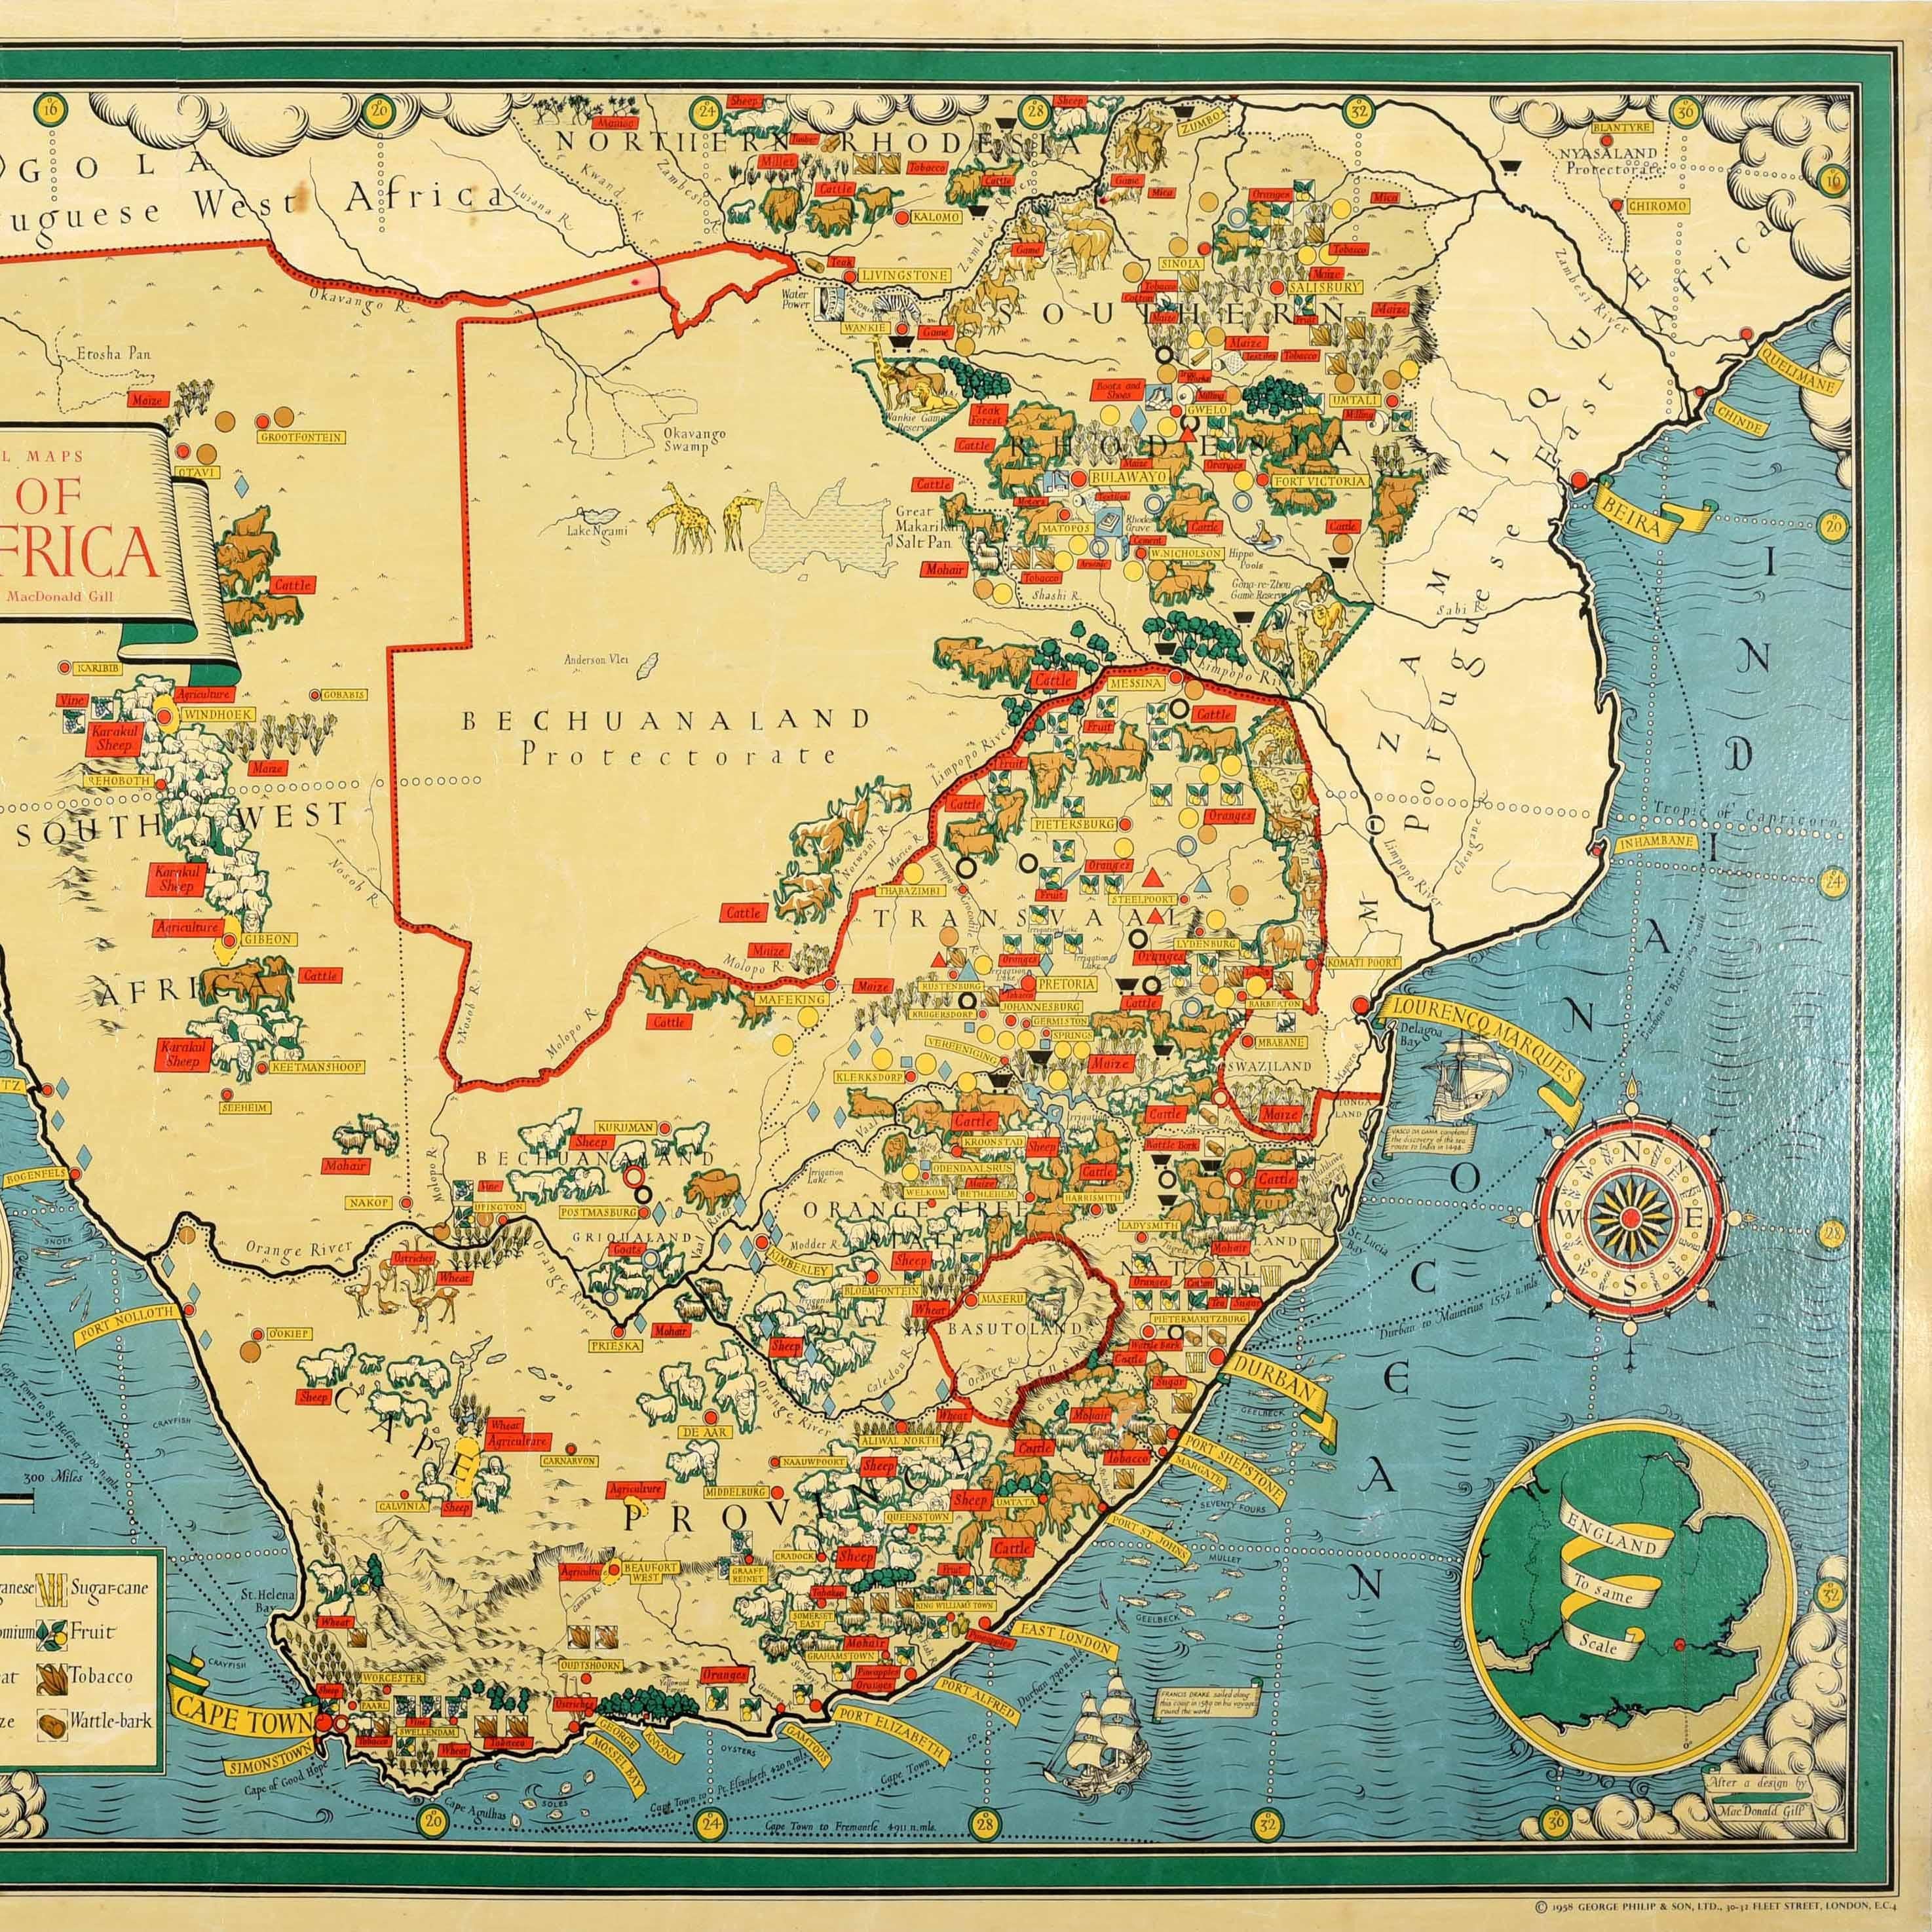 union of south africa on map